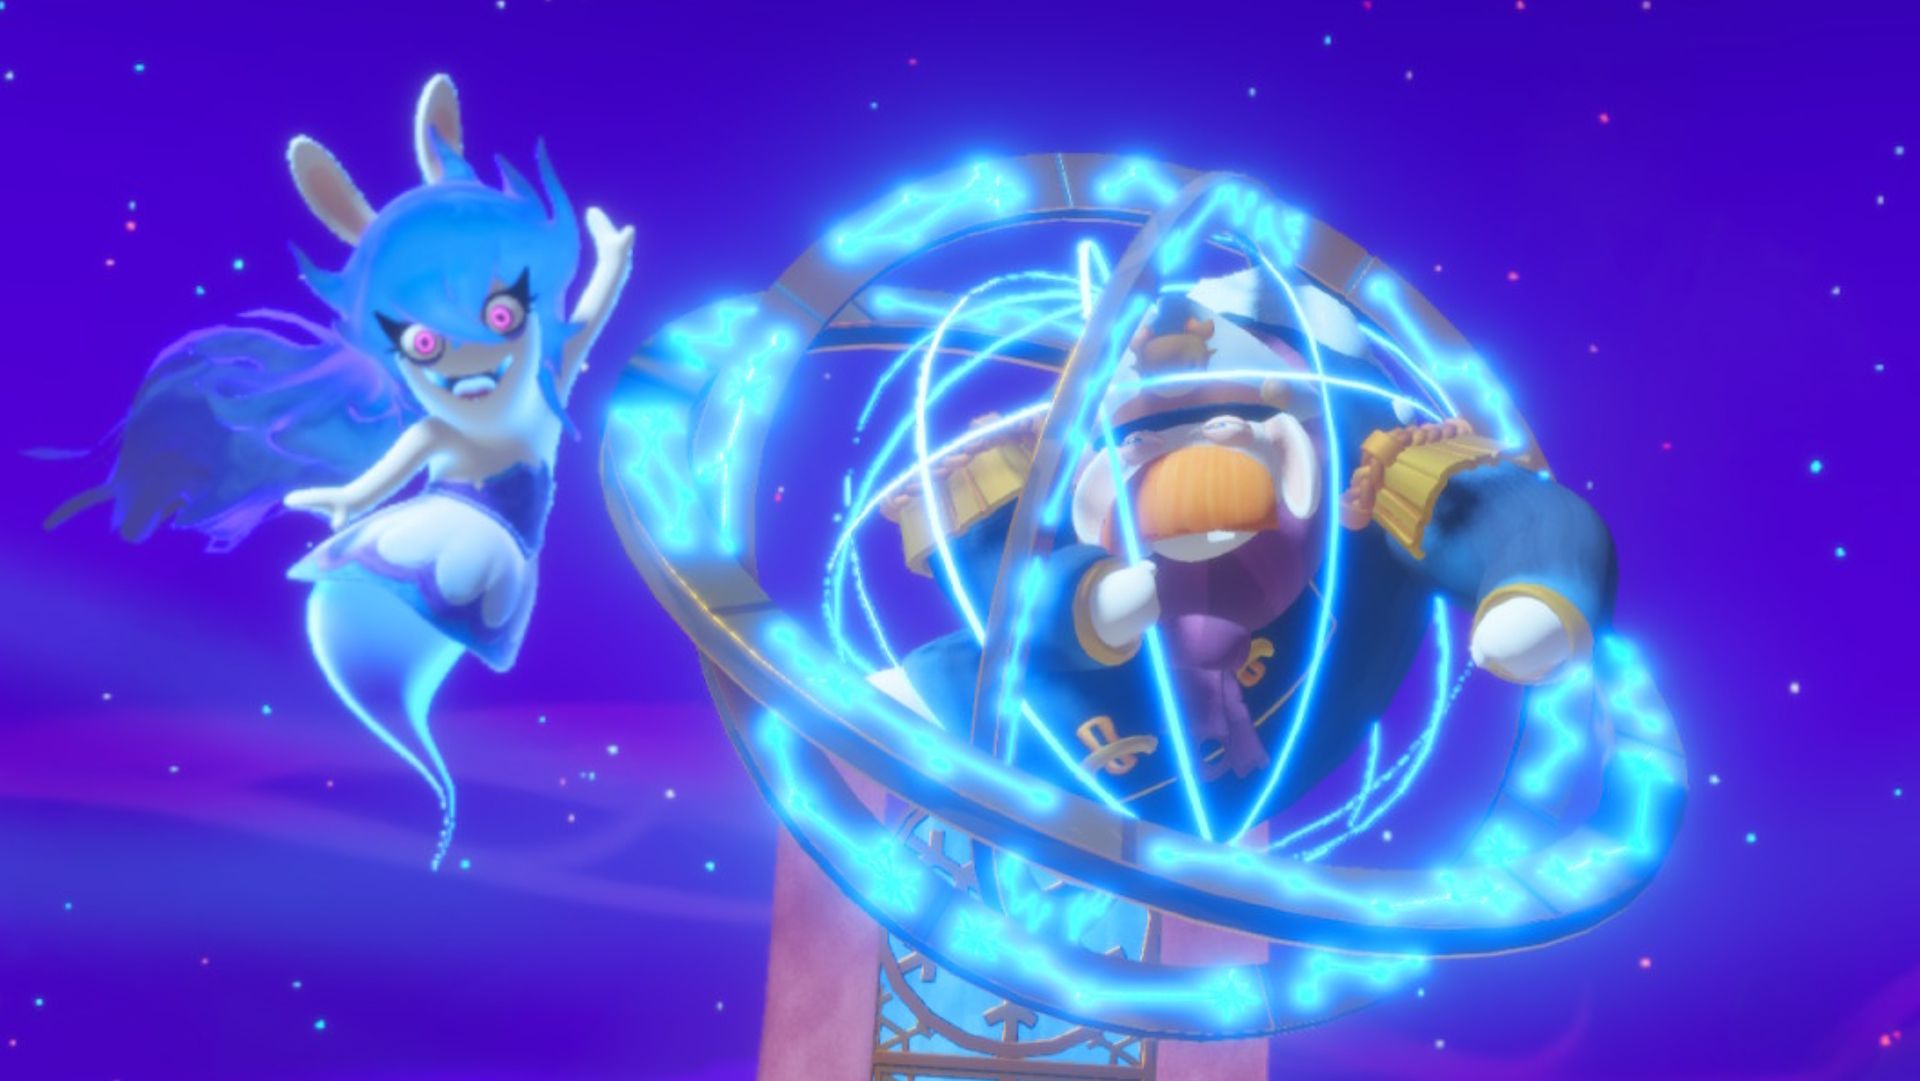 Mario + Rabbids: Sparks of Hope is a more dynamic take on tactical RPGs